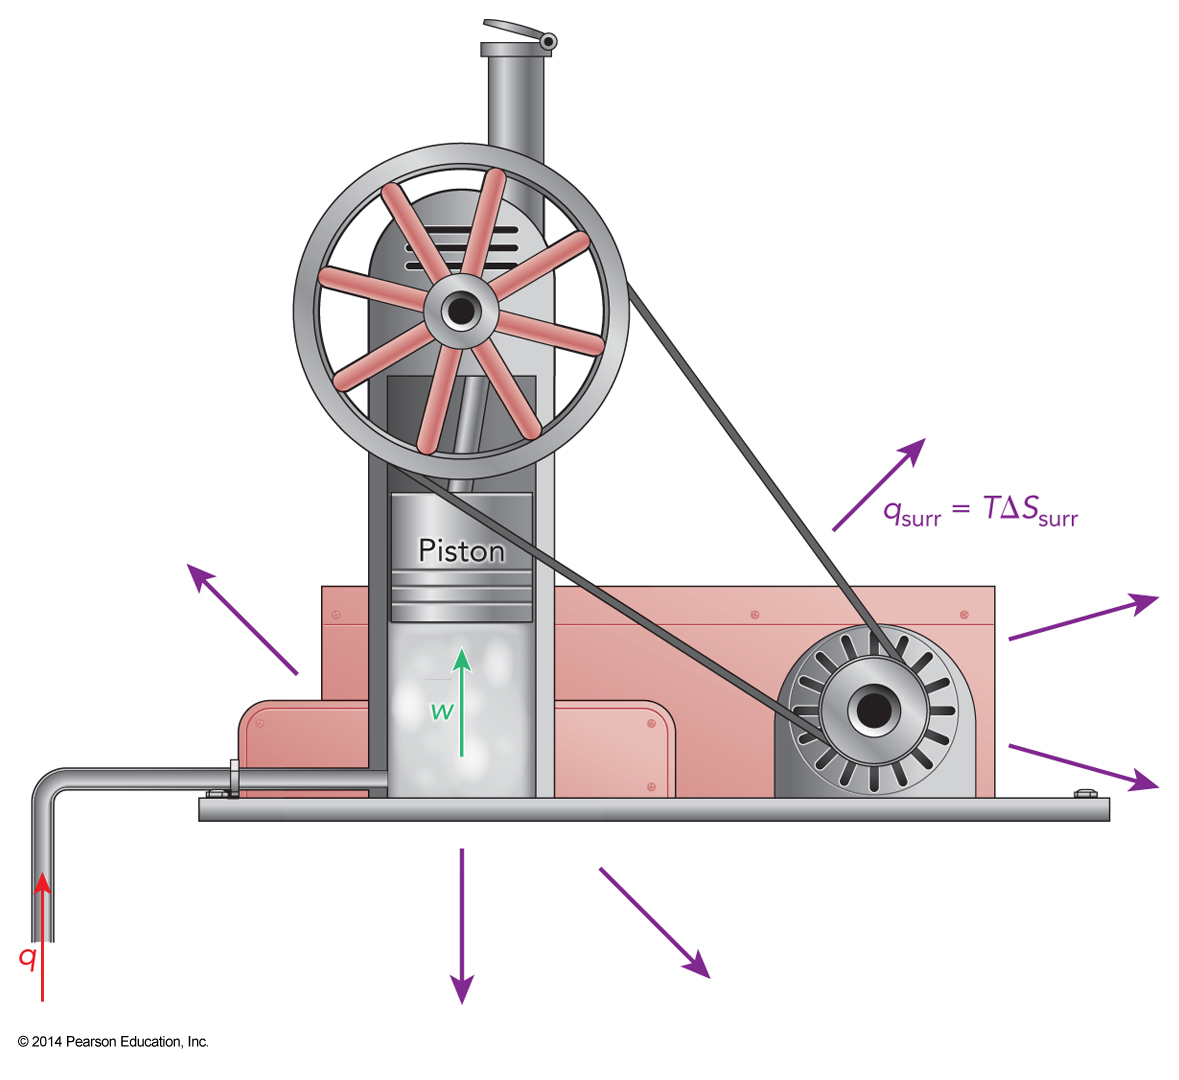 Heat enters the engine through a pipe. This heat heats up steam which expands pushing up a piston and driving the engine. Throughout the entire process, heat is being lost from the engine into the surroundings.